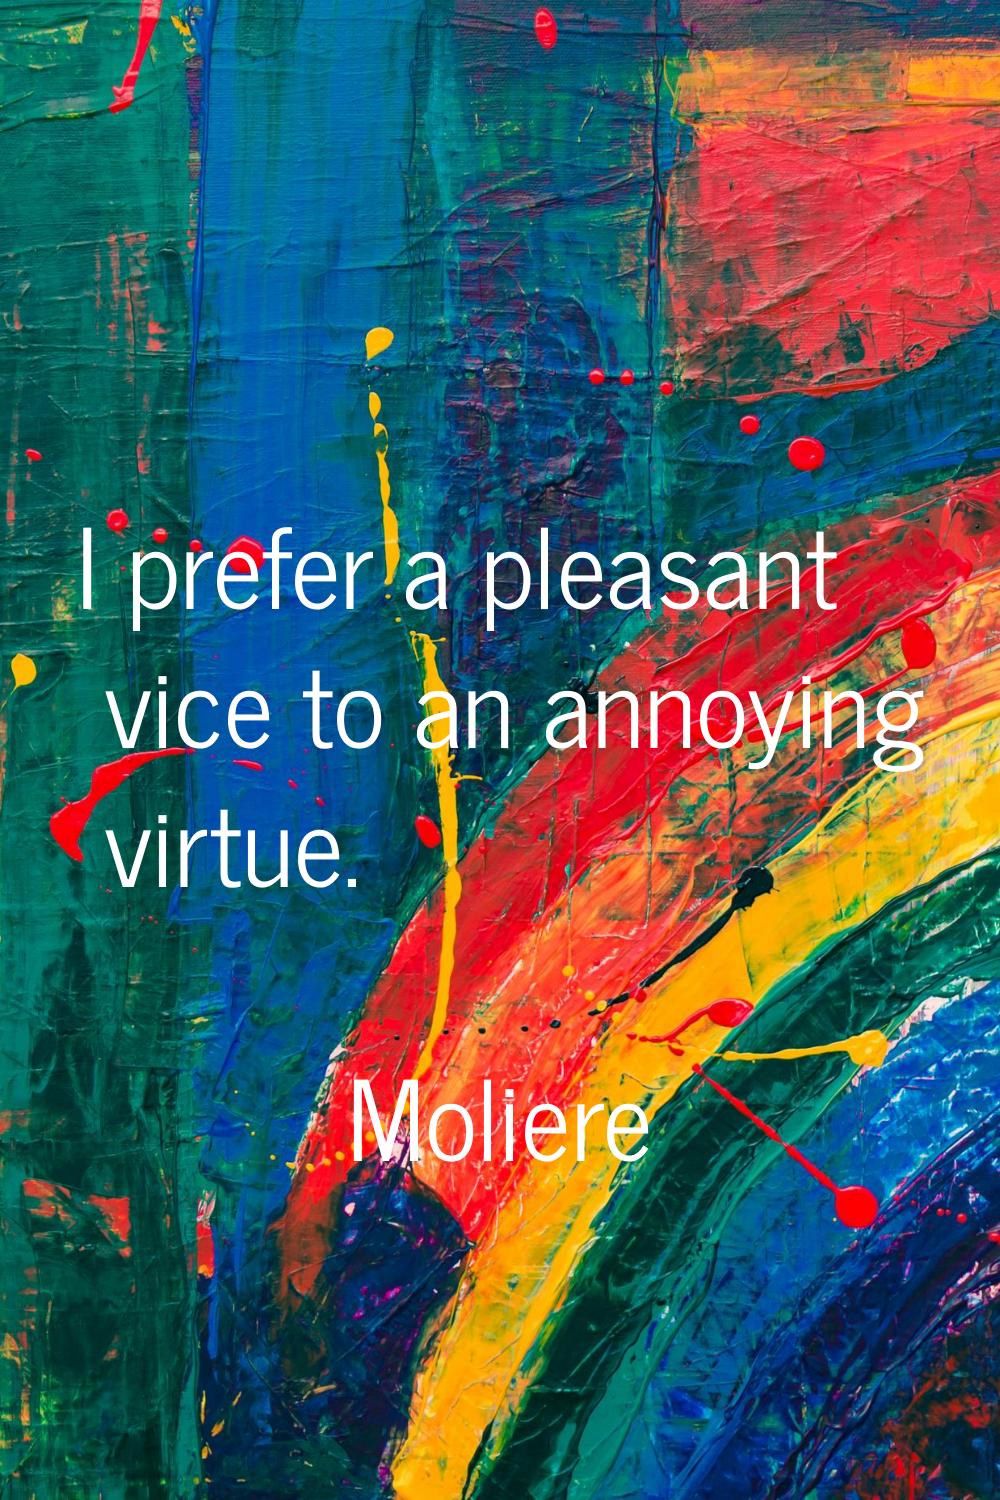 I prefer a pleasant vice to an annoying virtue.